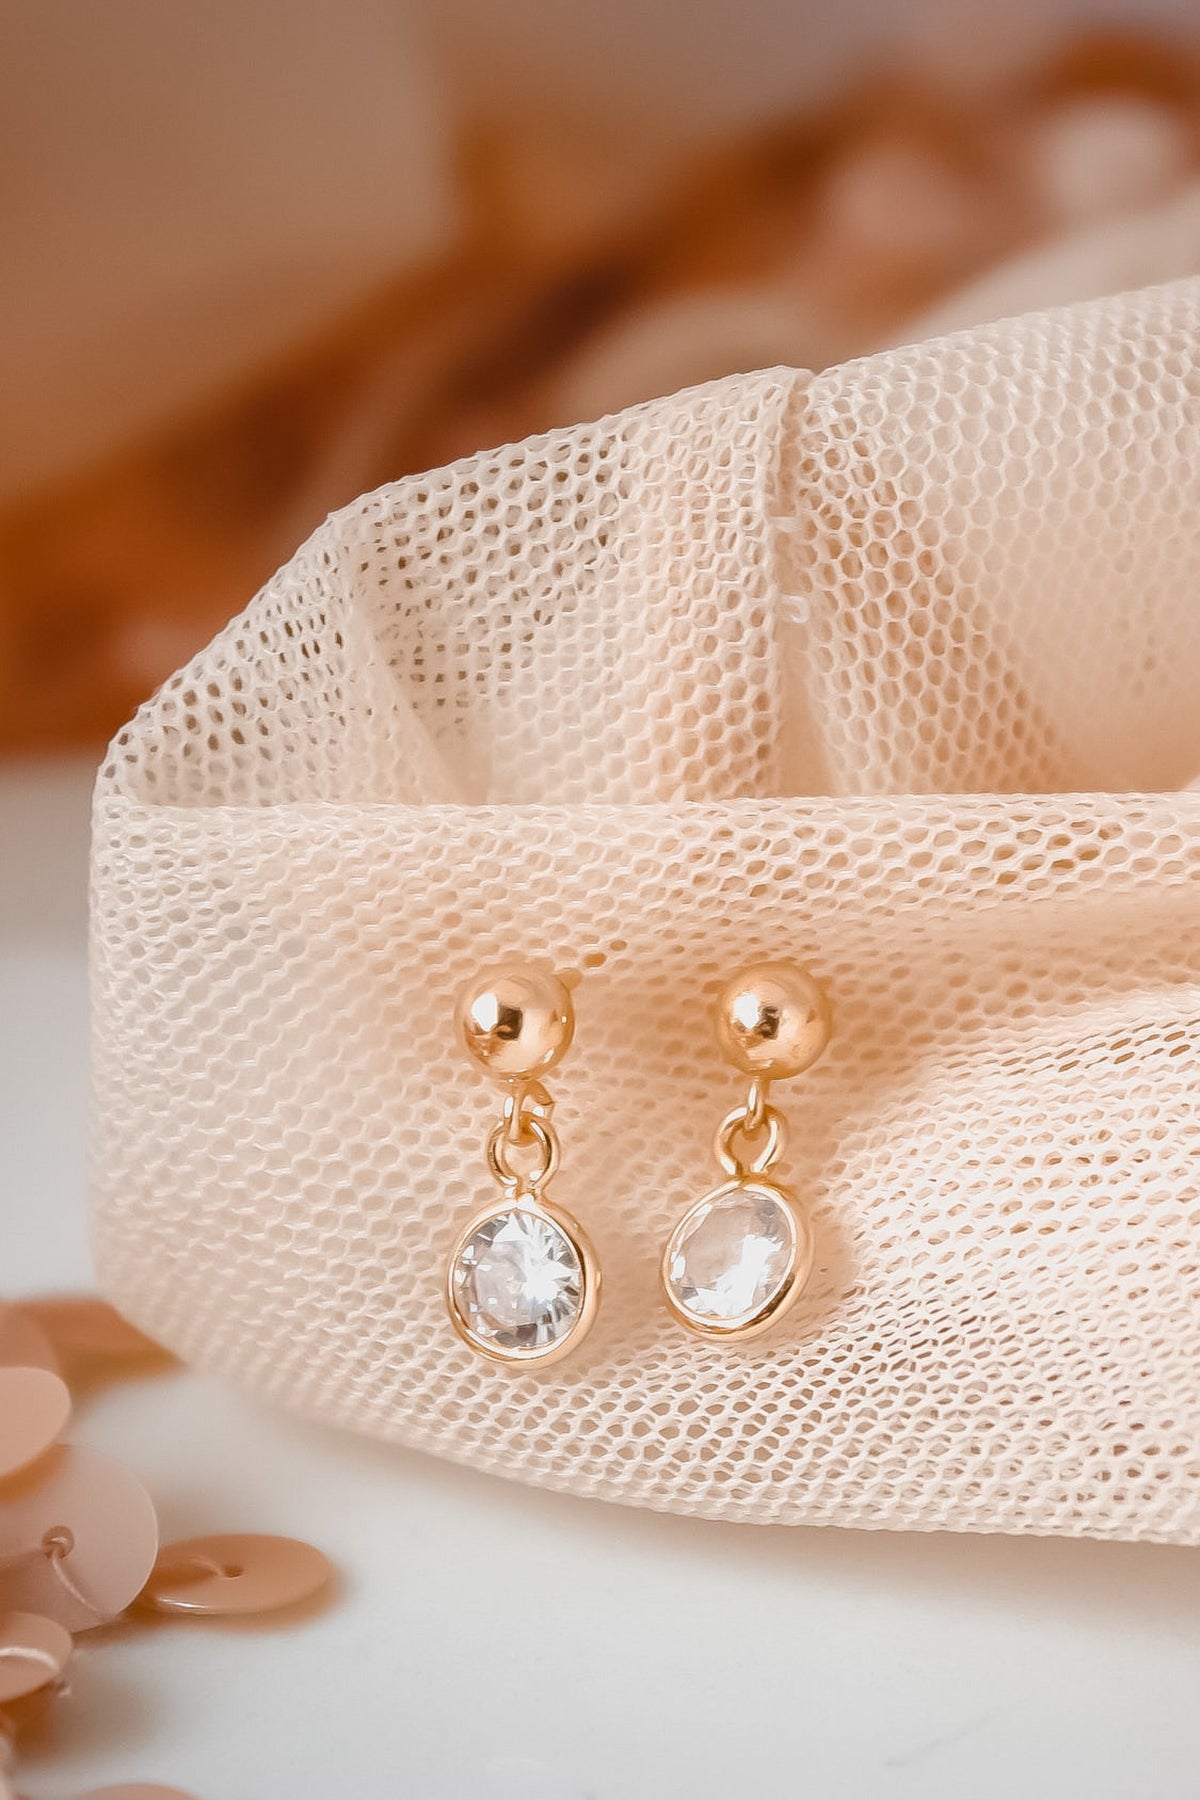 &quot;Gold-filled ball stud earrings with classic timeless design, featuring a shimmering cubic zirconia gemstone drop.